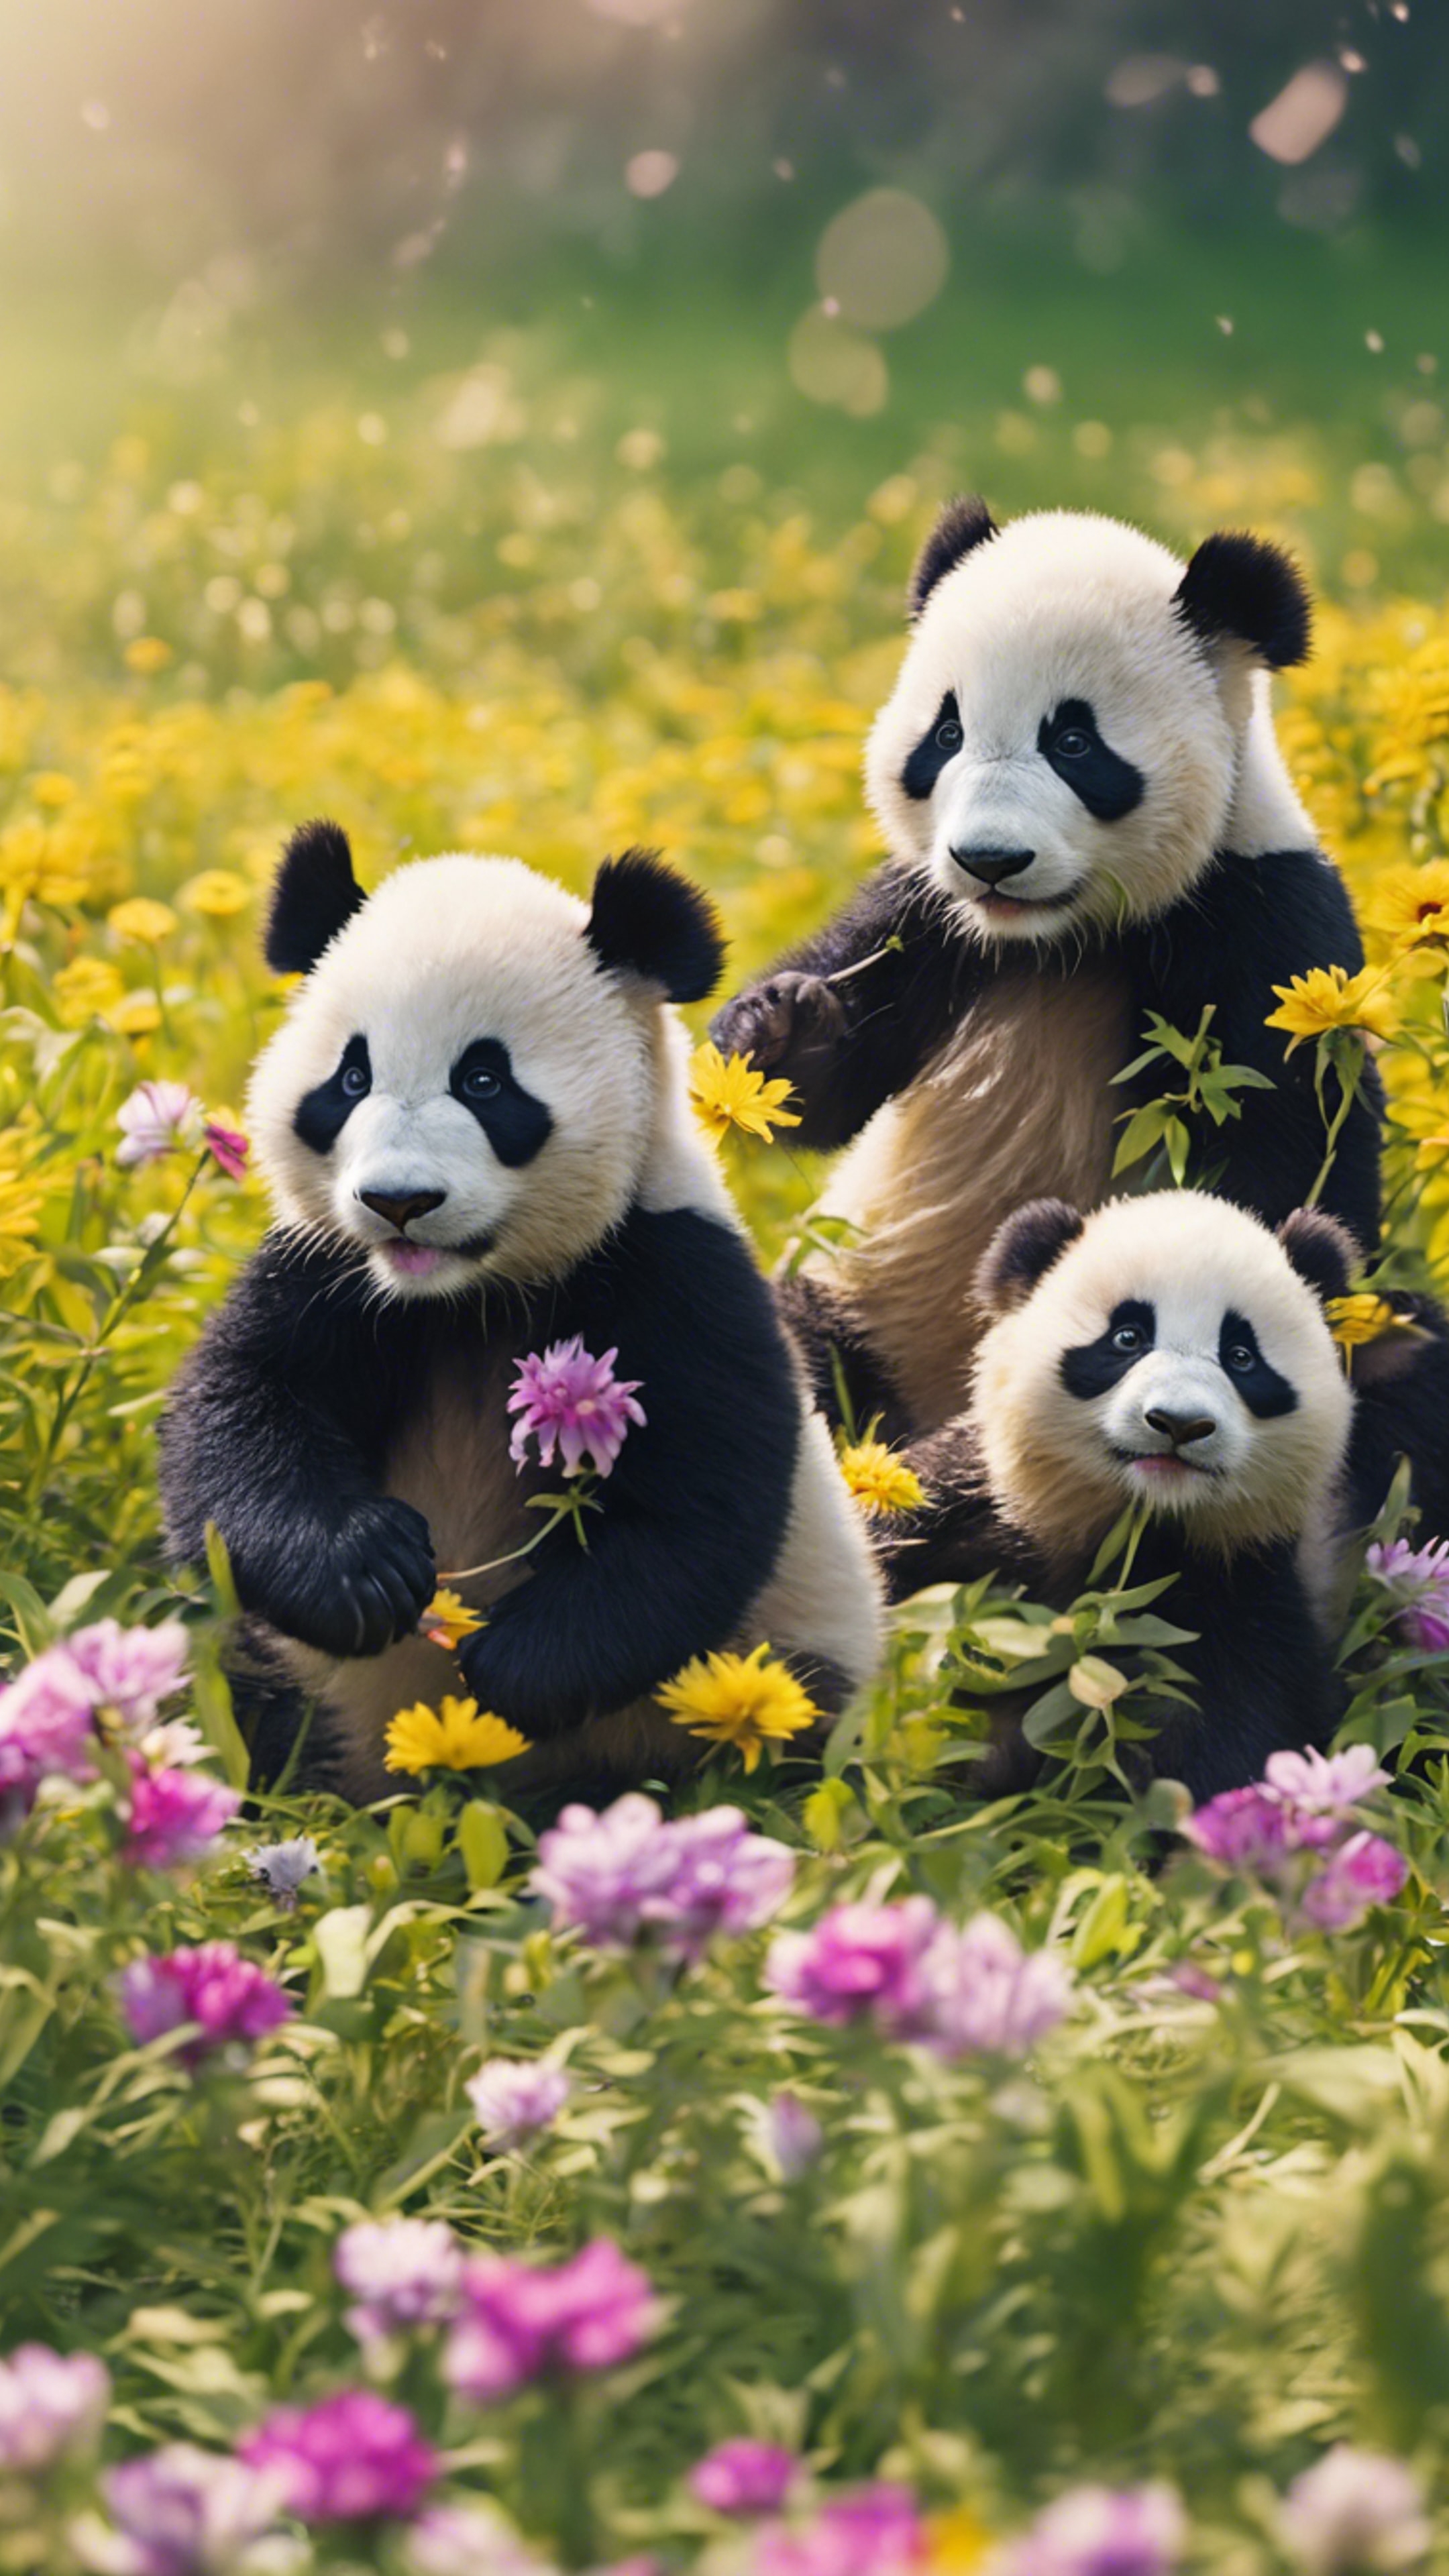 A group of lively panda cubs merrily playing tag in a field full of bright spring flowers. Wallpaper[9de4fa100eef4aefa43d]